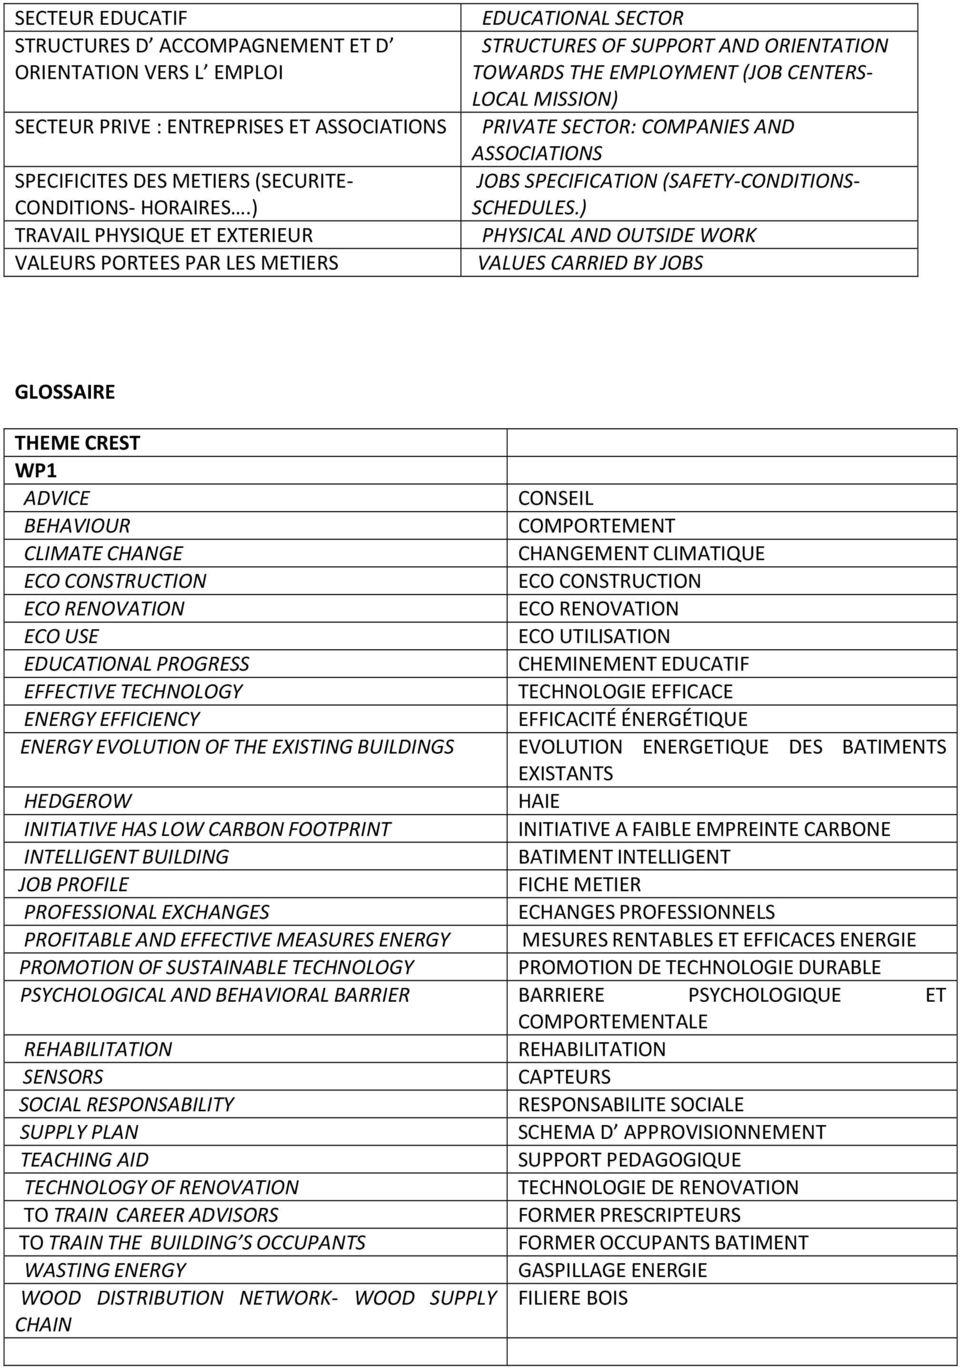 AND ASSOCIATIONS JOBS SPECIFICATION (SAFETY-CONDITIONS- SCHEDULES.